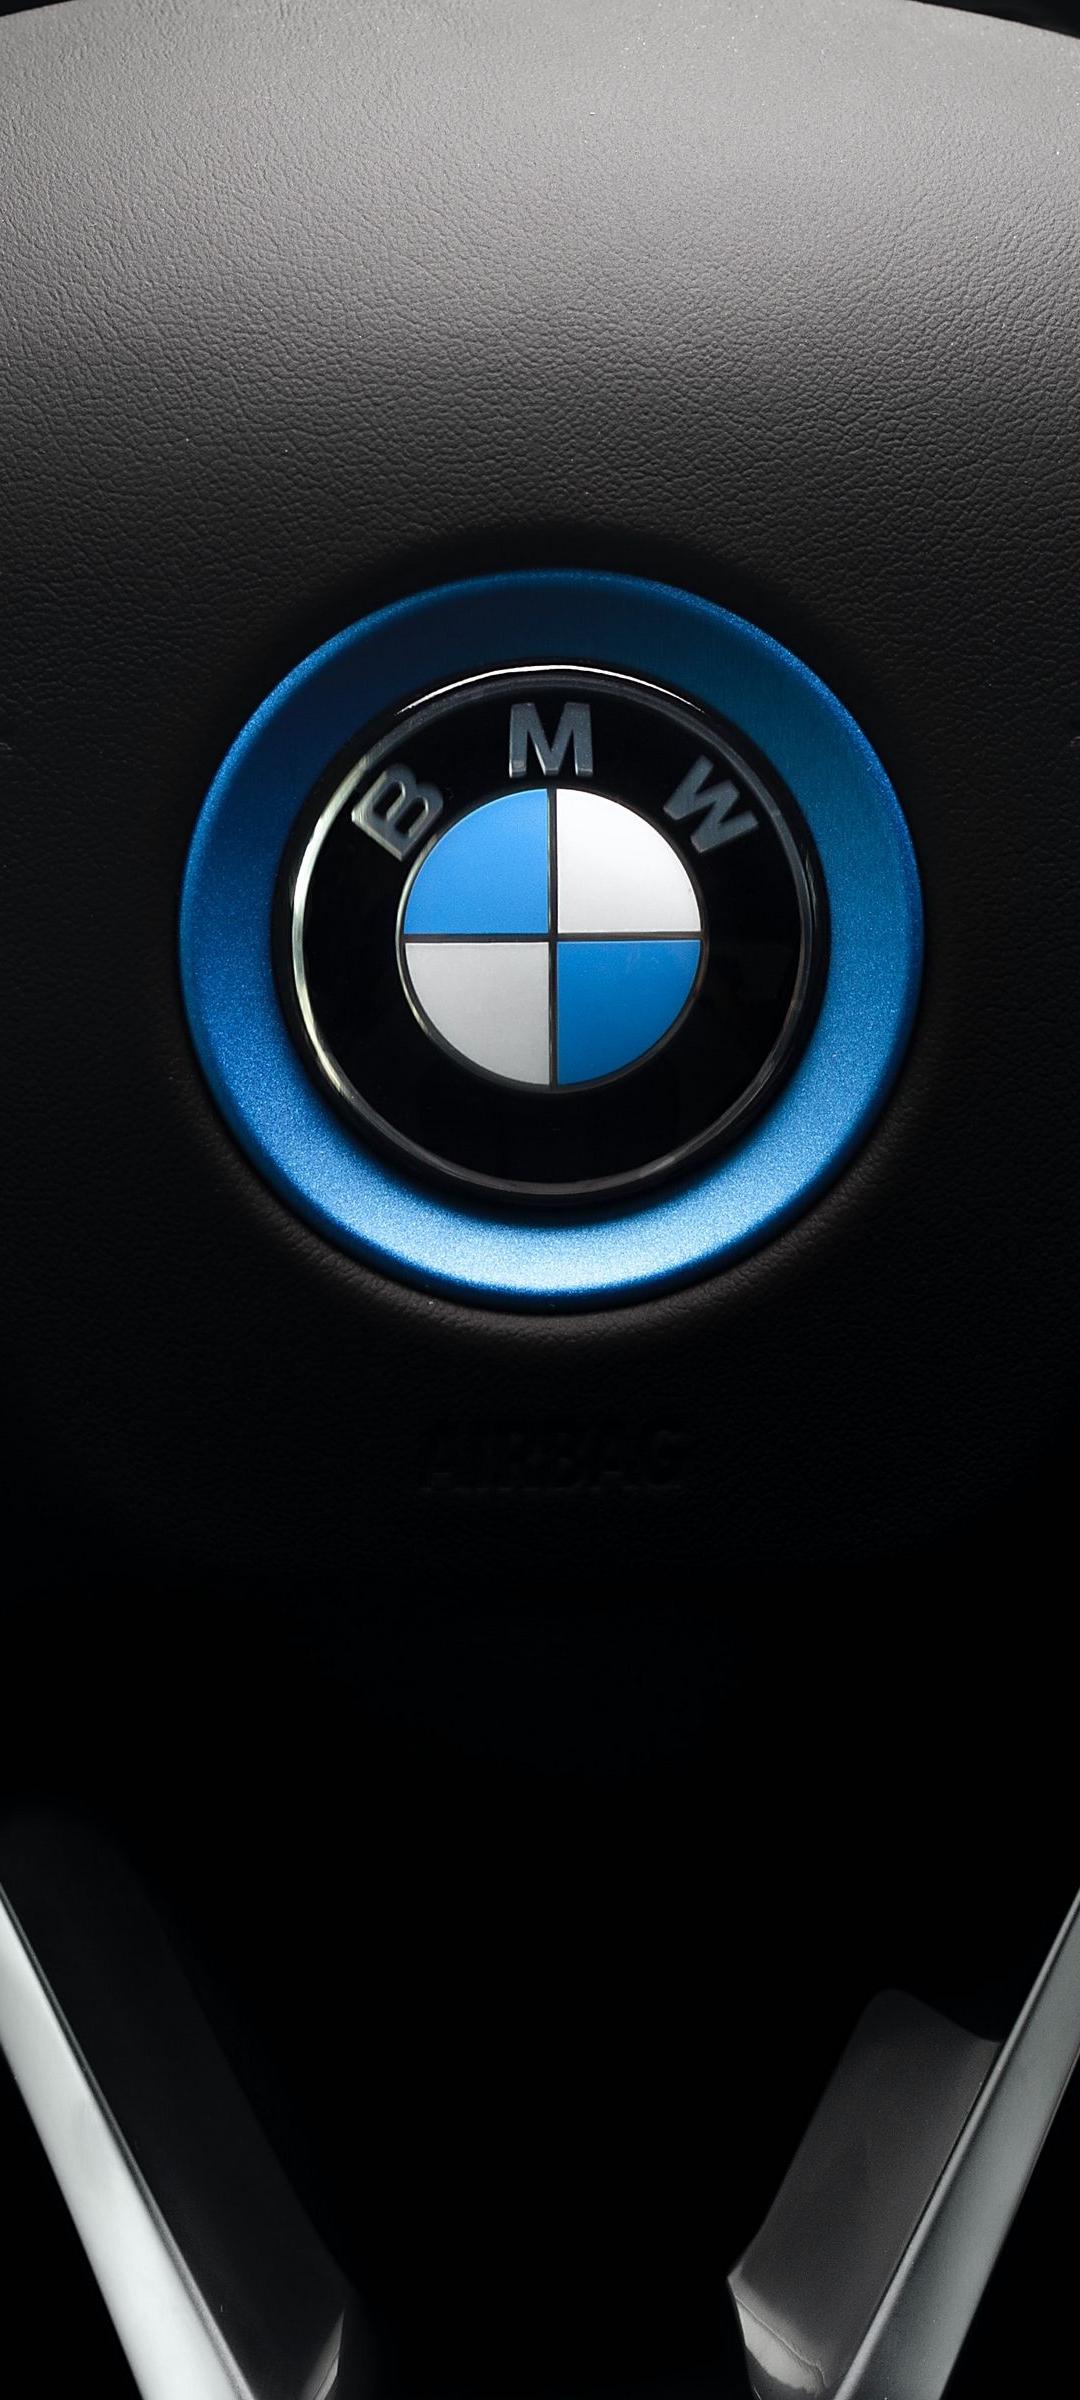 IPhone wallpaper of the BMW logo on the steering wheel - BMW